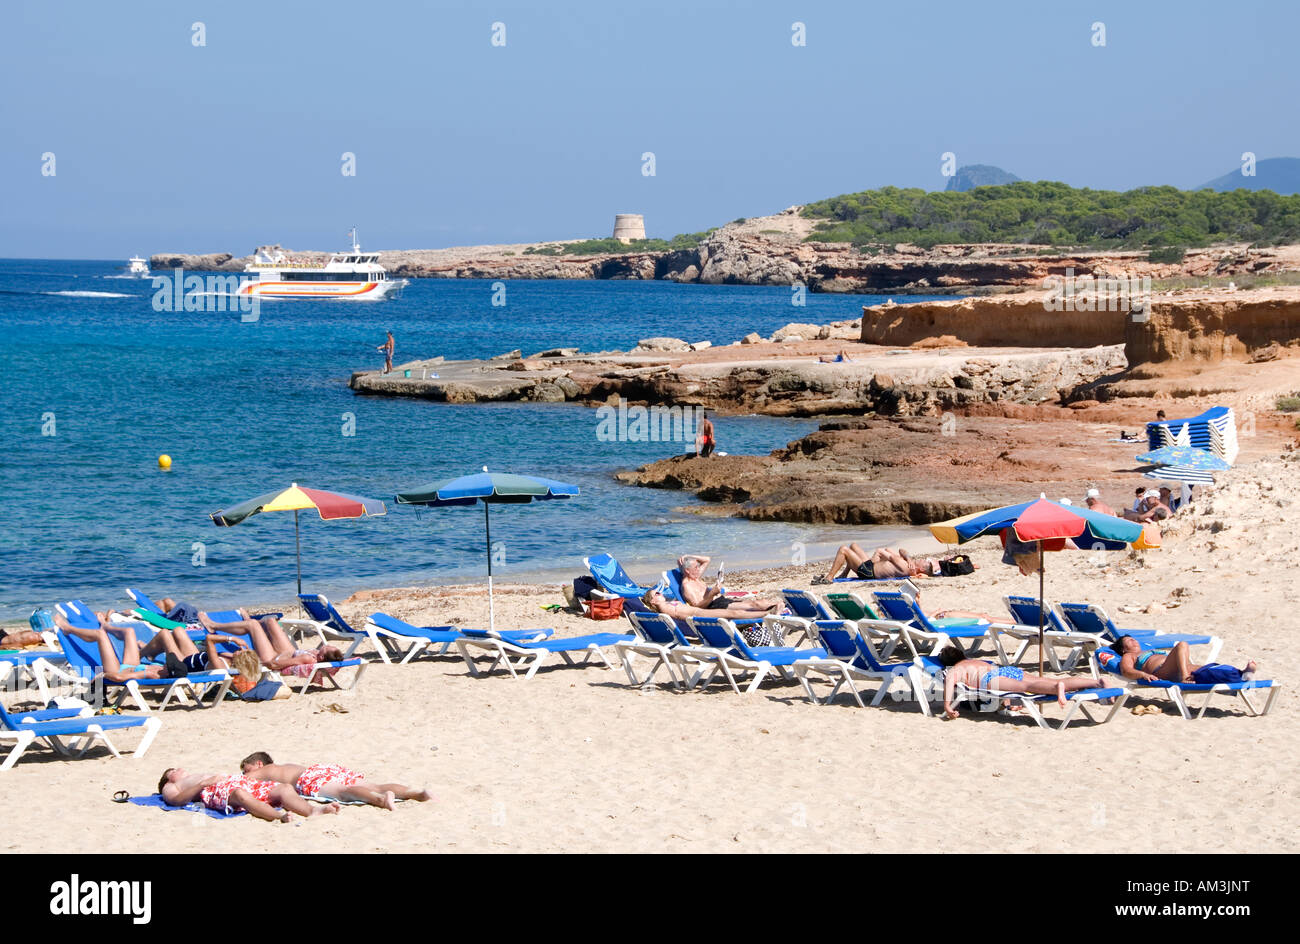 Tourists on the beach at Platges de Comte, Ibiza with a ferry in the distance Stock Photo